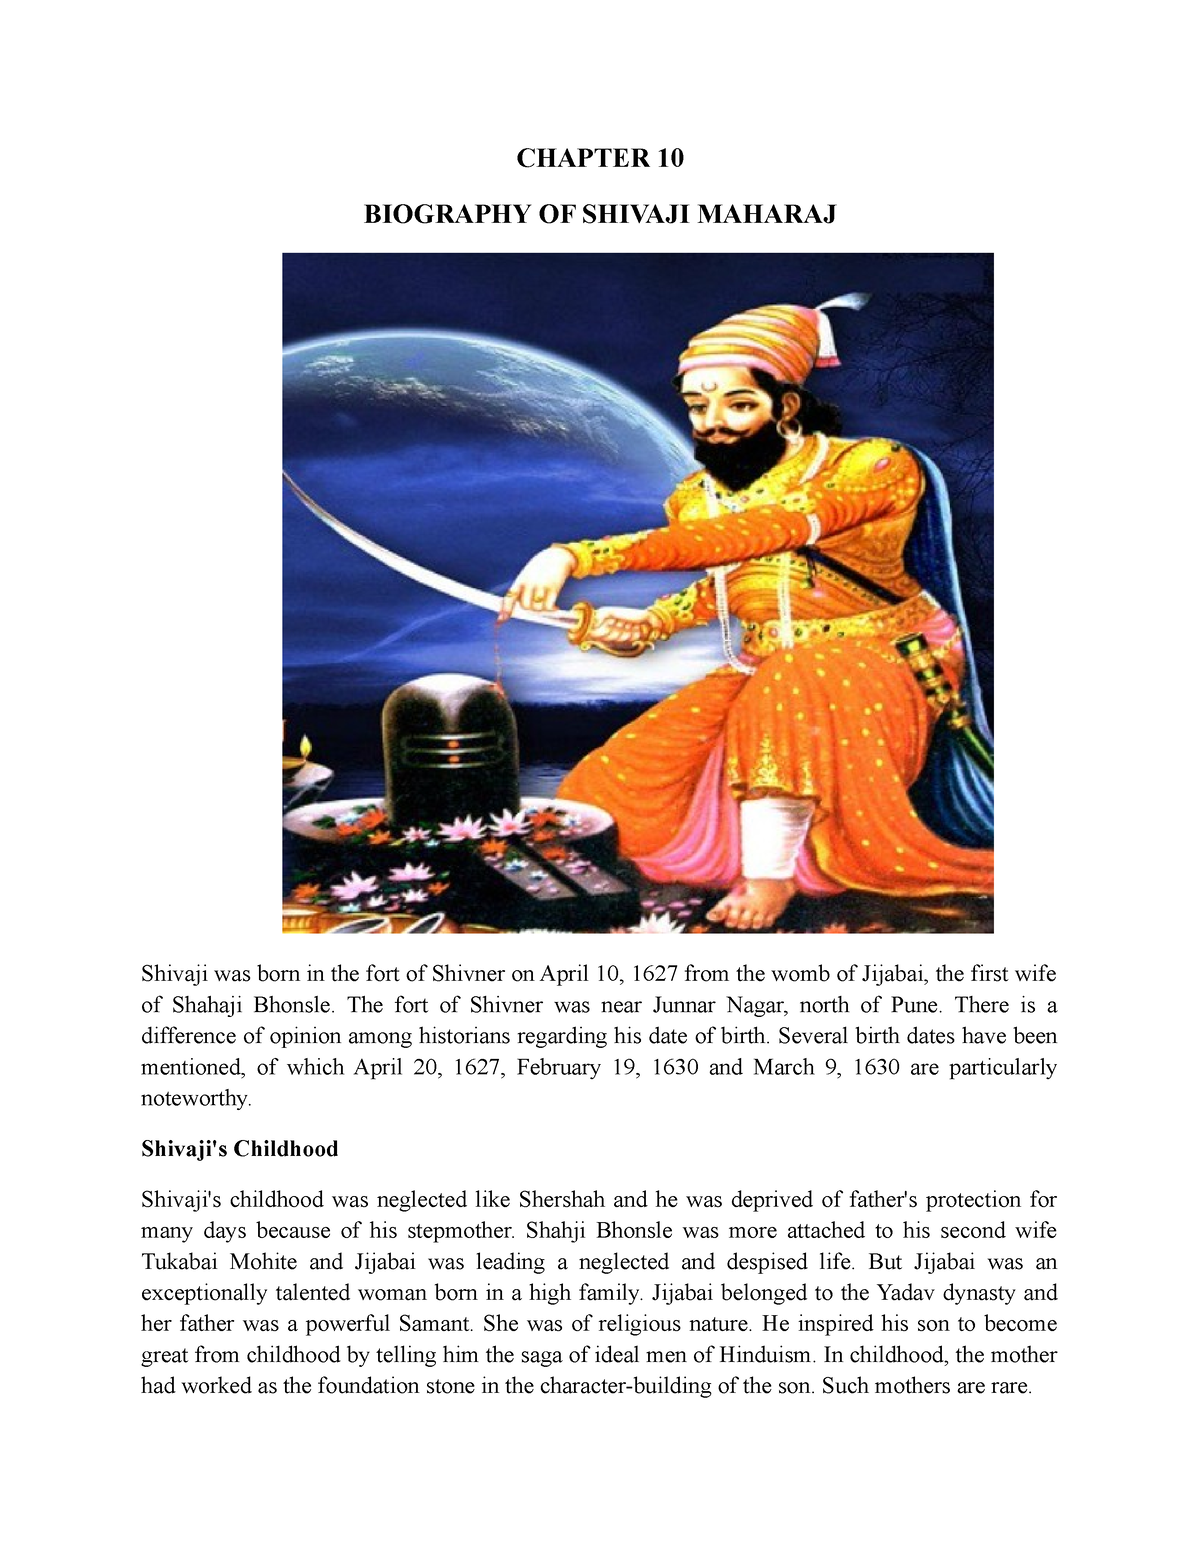 Foreign Biographies of Shivaji | Exotic India Art